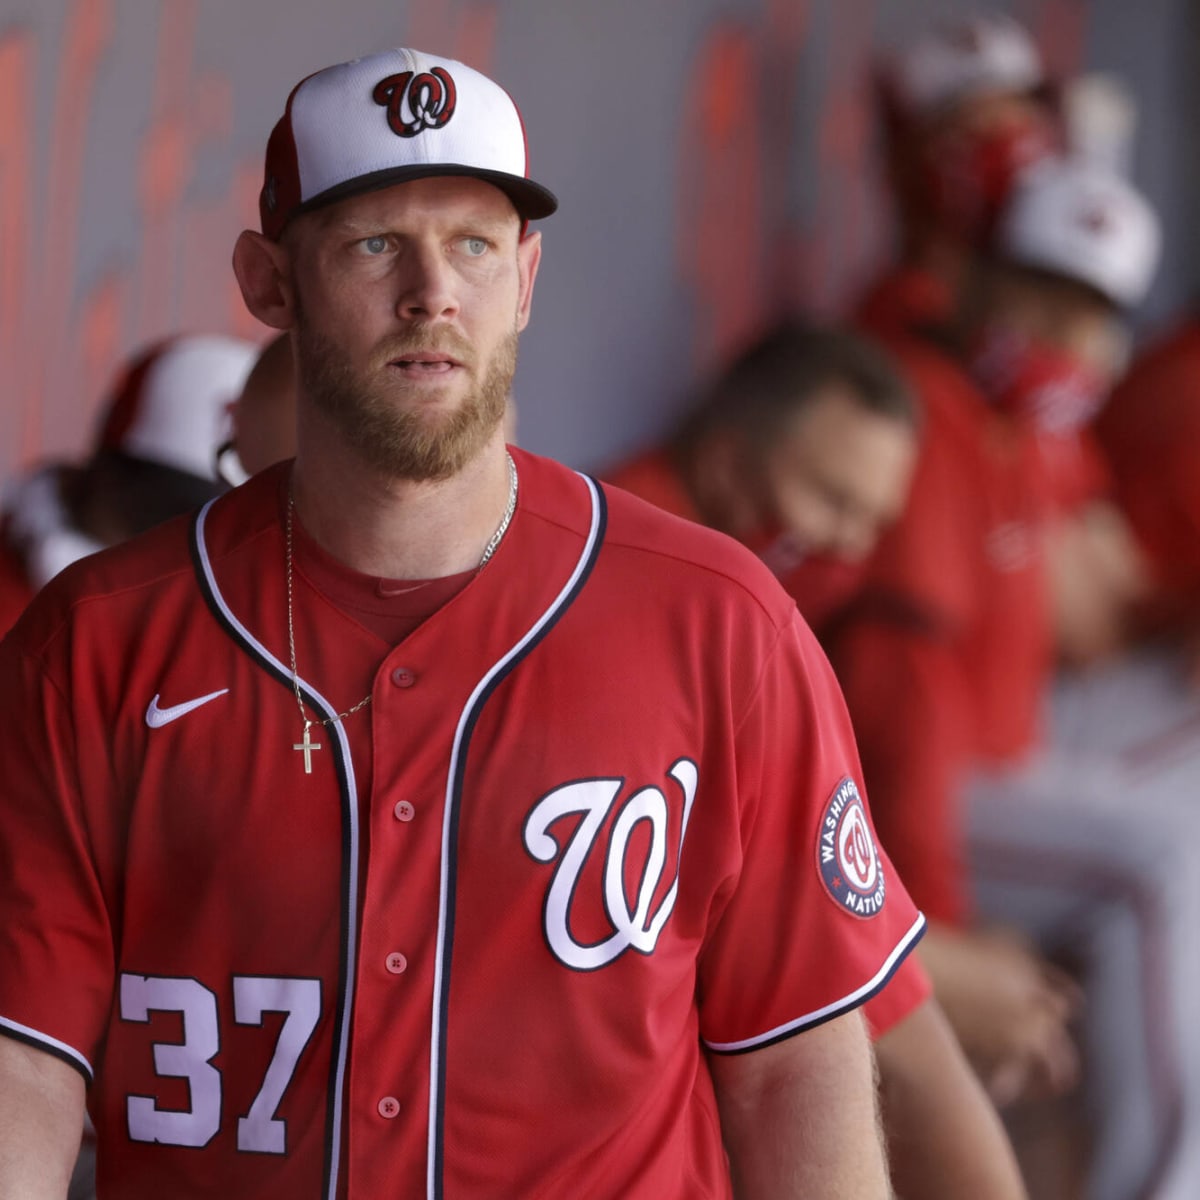 Even with injuries, Stephen Strasburg's career still matched the hype